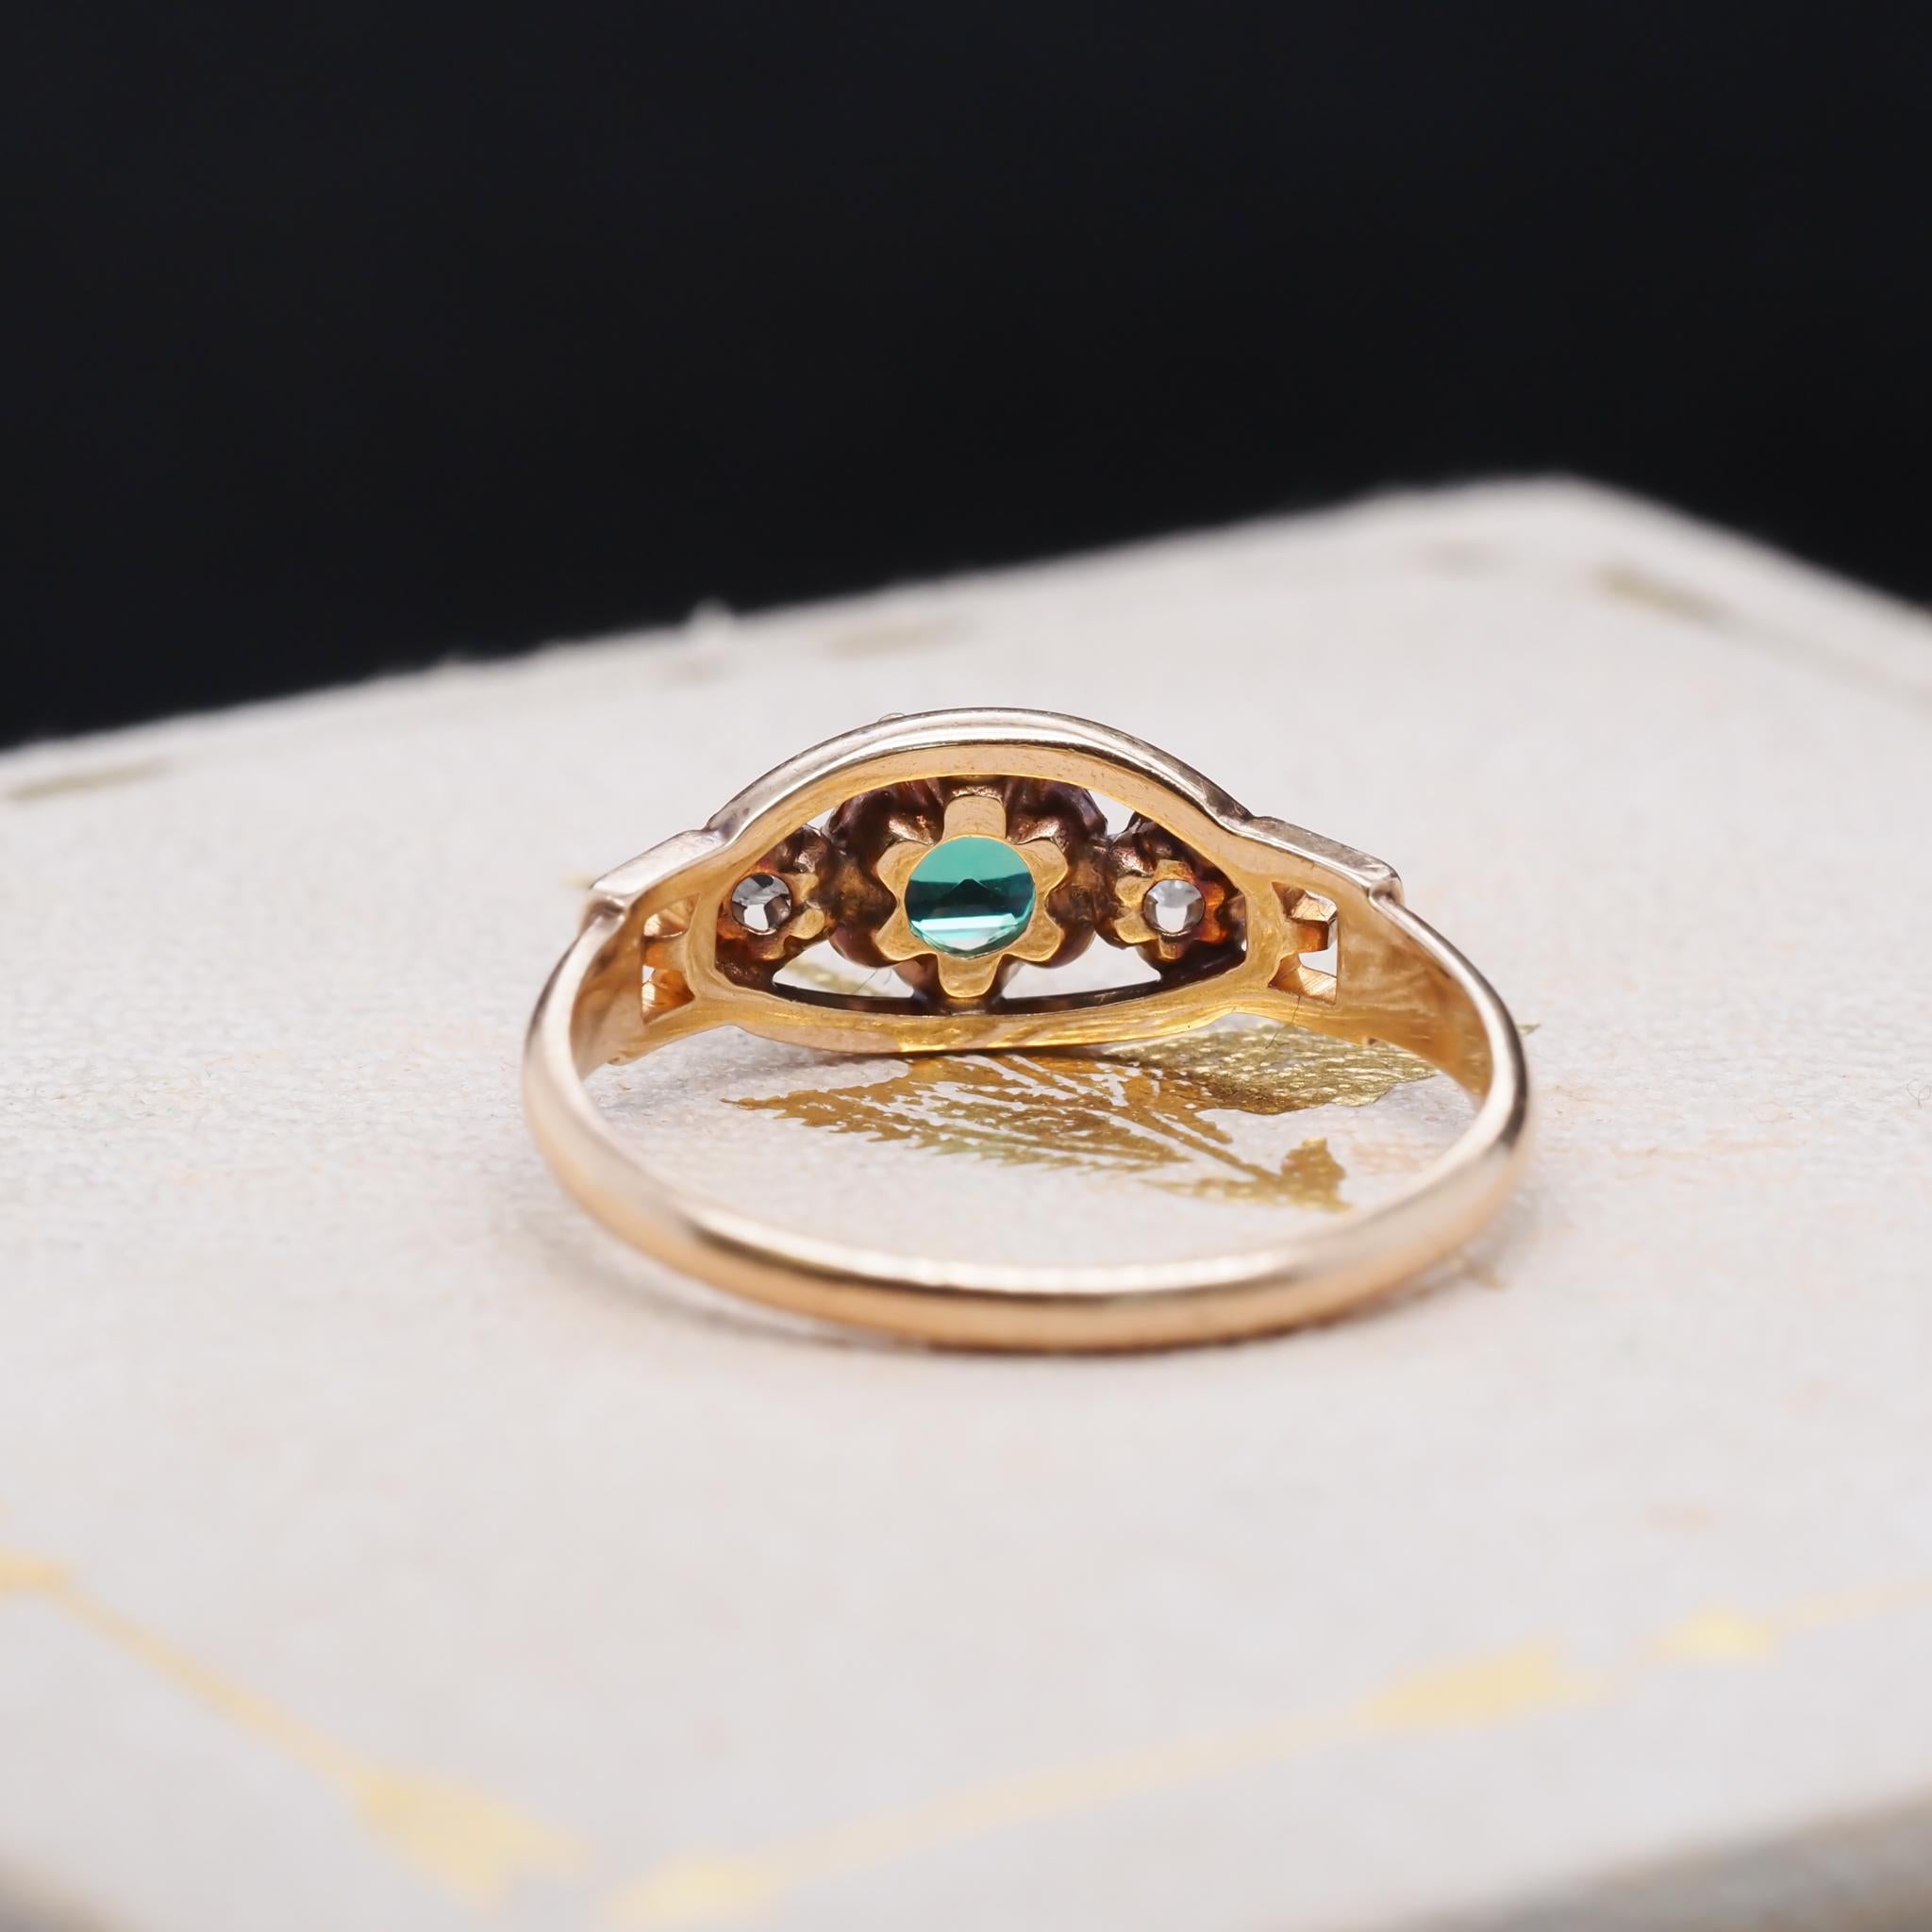 Circa 1900s Edwardian Emerald and Rose Cut Diamond Engagement Ring In Good Condition For Sale In Atlanta, GA